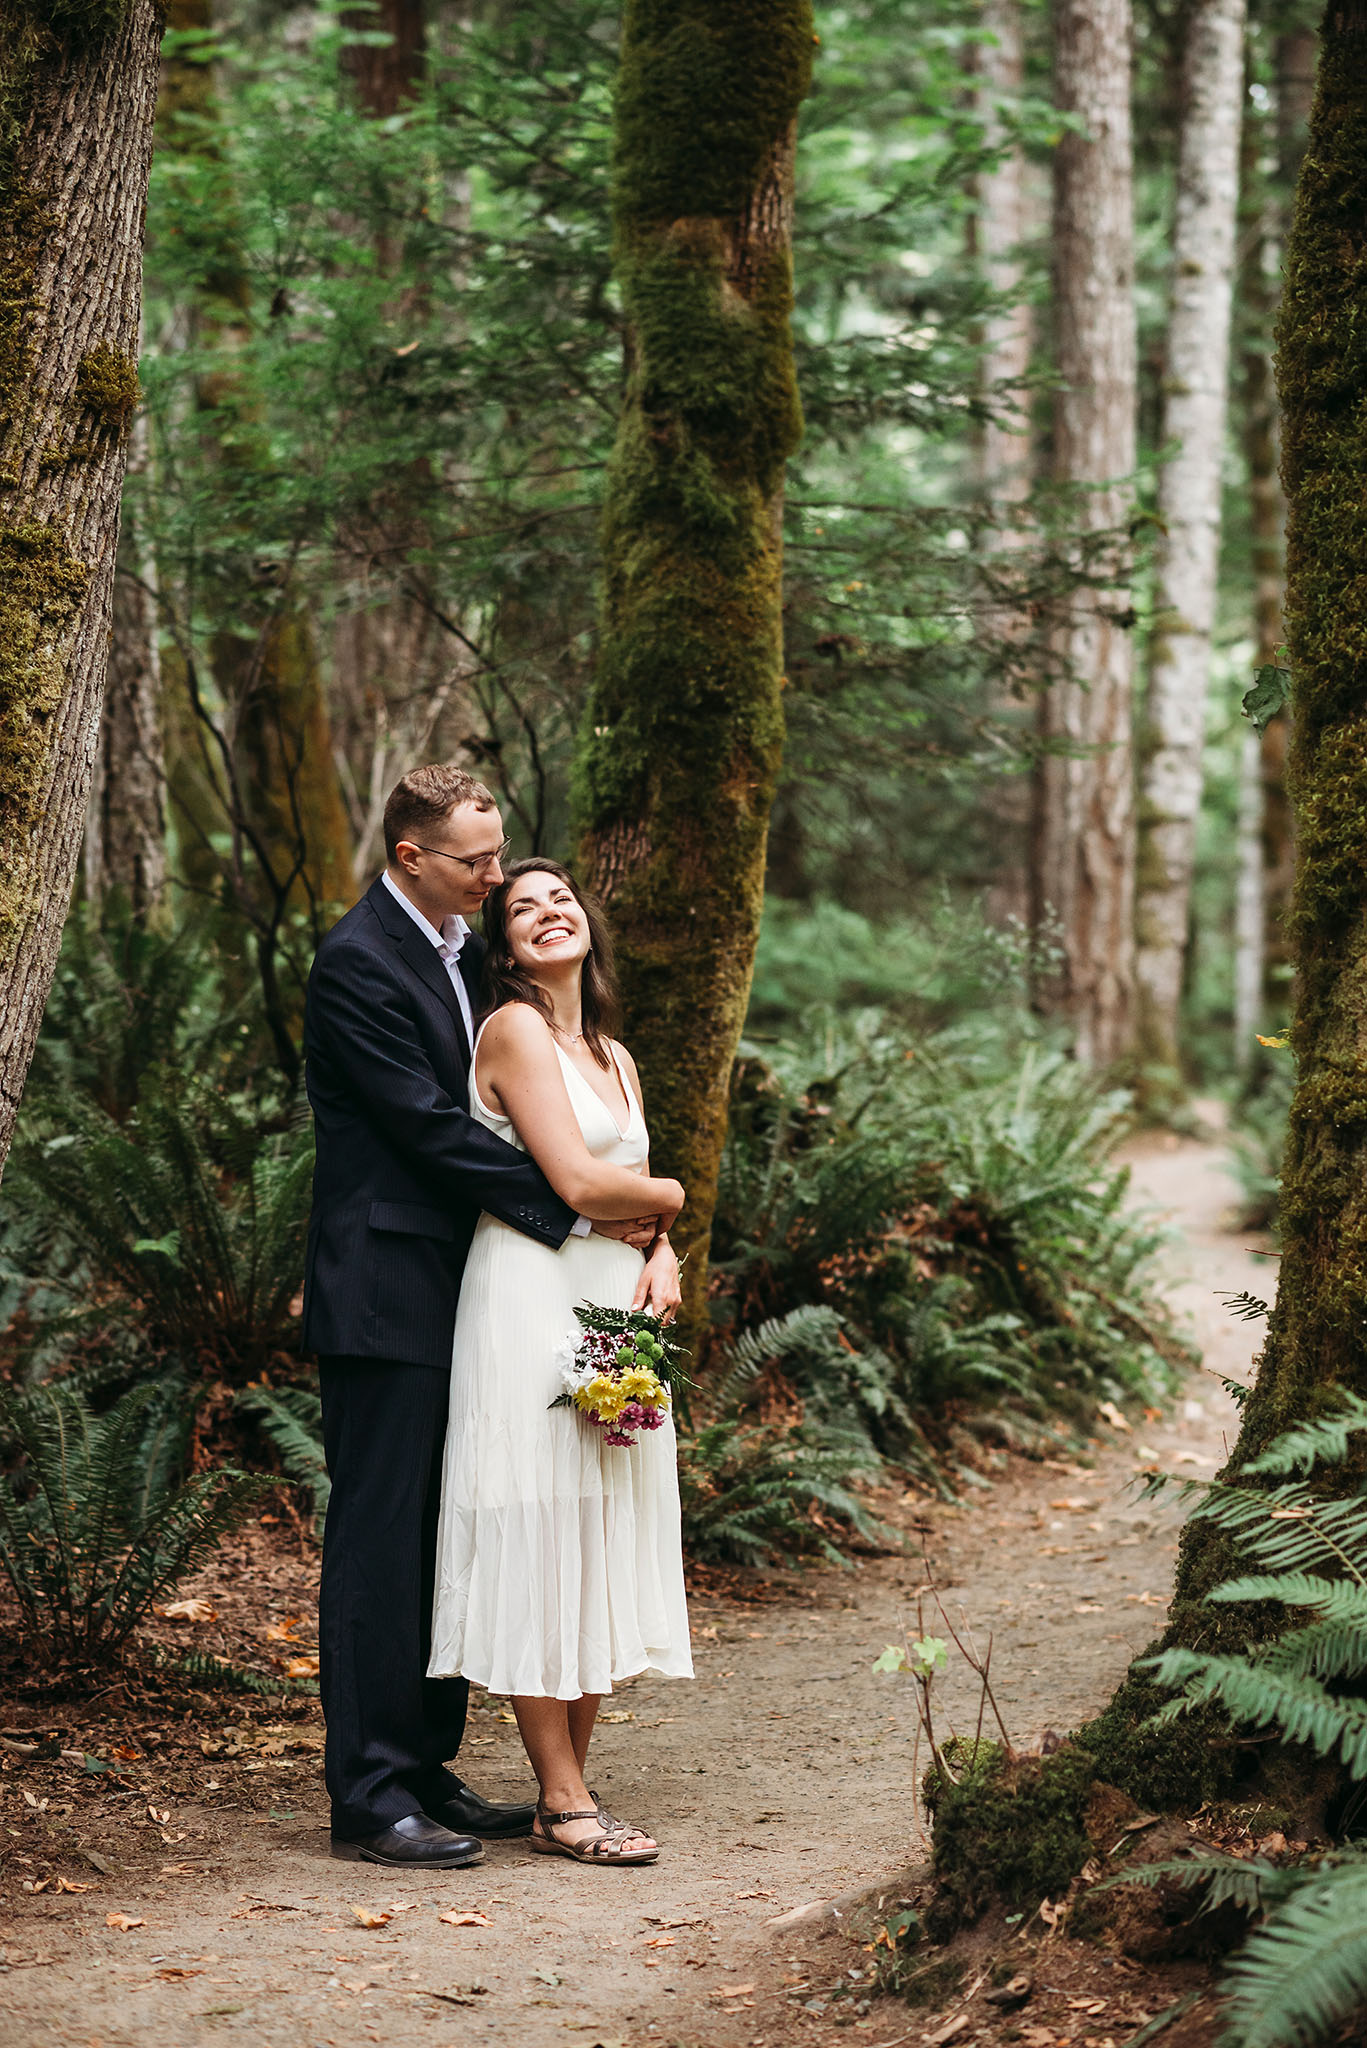 Wedding elopement couple embracing at Seal Bay Park in the Comox Valley.